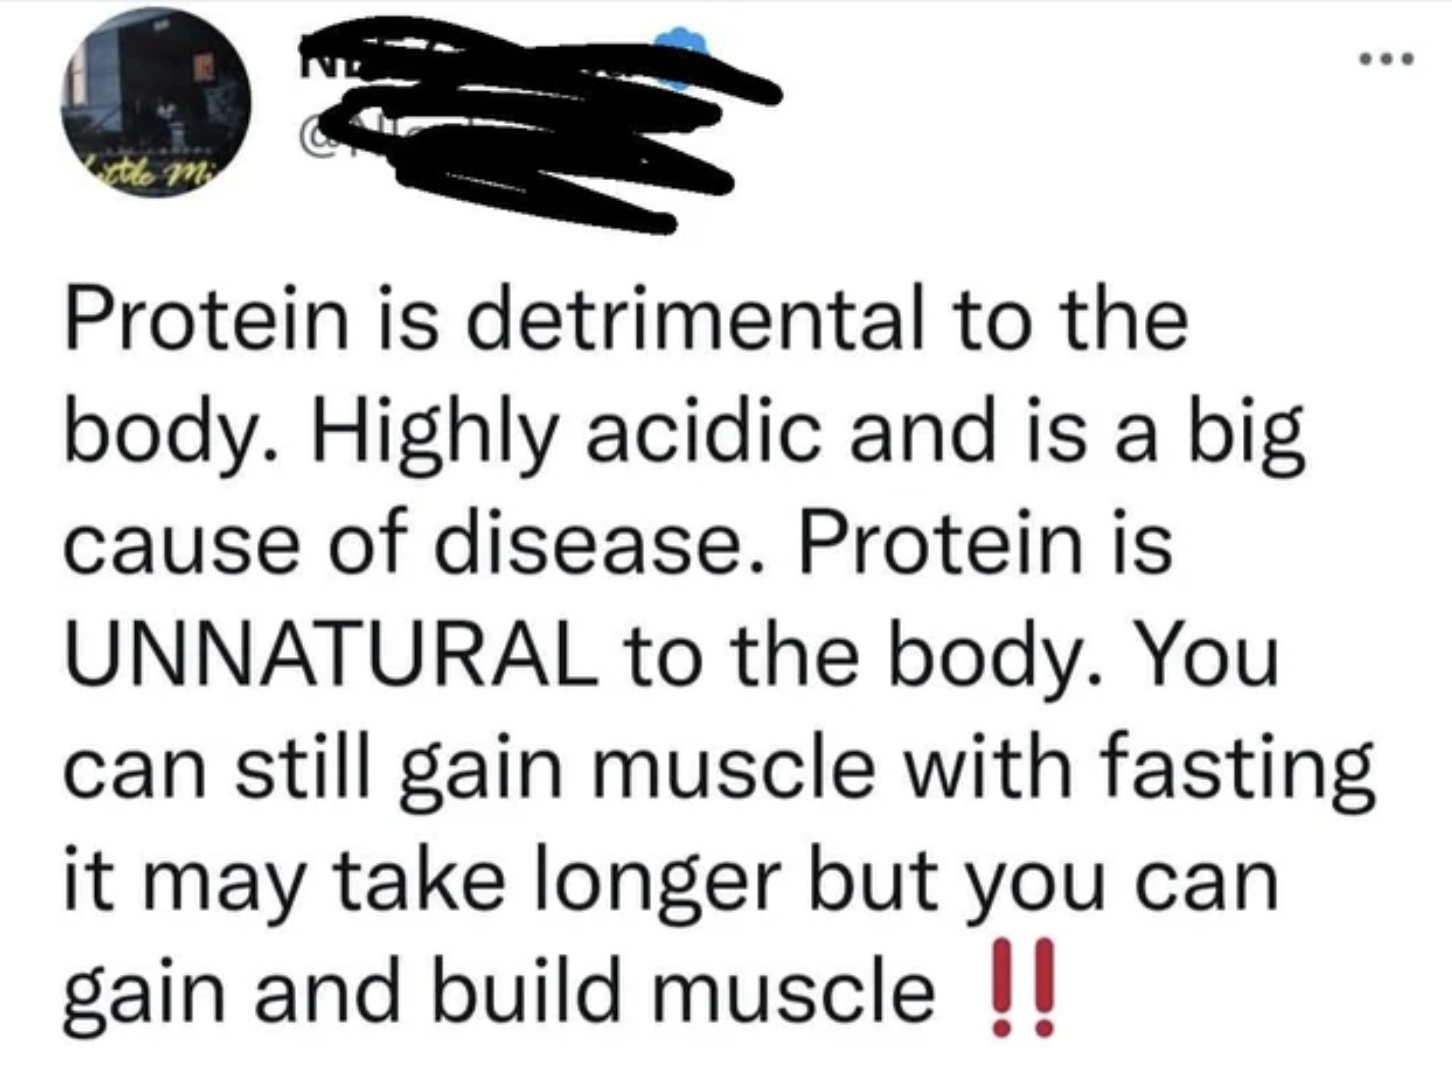 Confidently Incorrect - Protein is detrimental to the body. Highly acidic and is a big cause of disease. Protein is Unnatural to the body. You can still gain muscle with fasting it may take longer but you can gain and build muscle !!